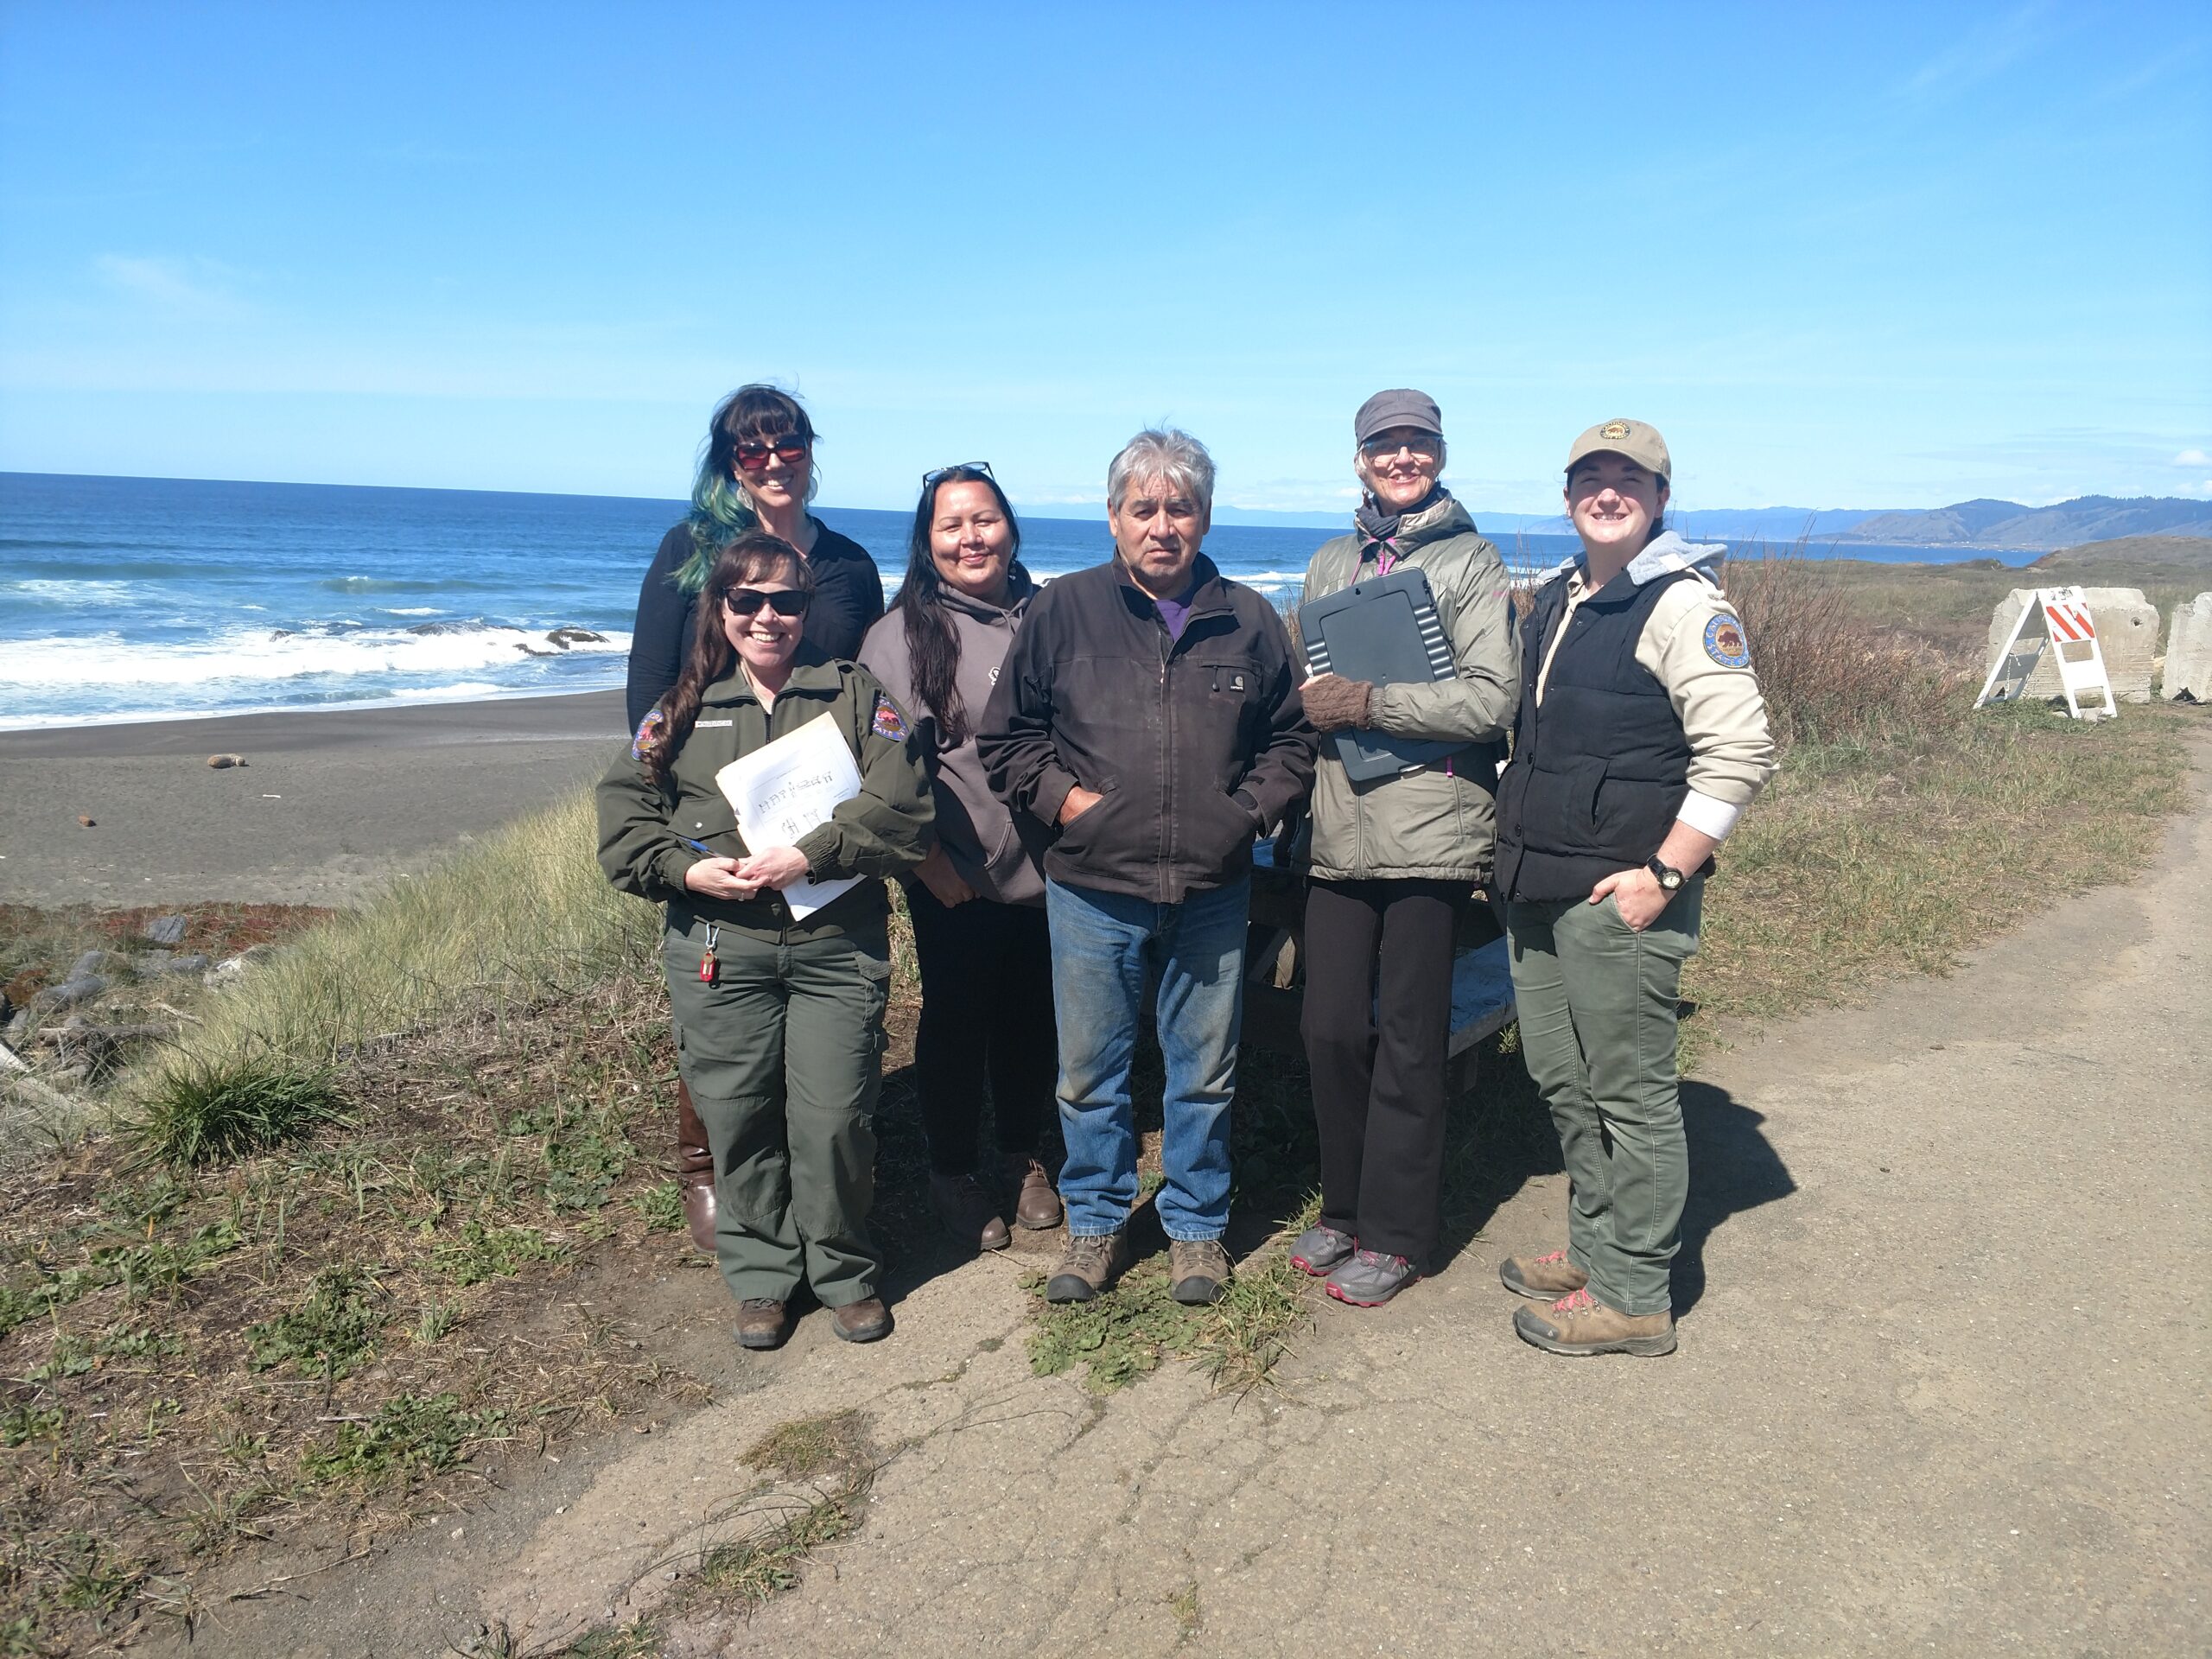 Site visit with representatives from local tribes to create 4 new interpretive panels at MacKerricher State Park featuring stories from local tribes. MacKerricher currently has no educational materials or acknowledgement of local tribes in spite of the fact that the park is the site of the former Mendocino Indian Reservation. Pictured: Michelle Levesque, Elizabeth Cameron, Tina Sutherland, Eddie Knight, Erica Fielder, Katherine Gabrielson, CSP Interpreter.